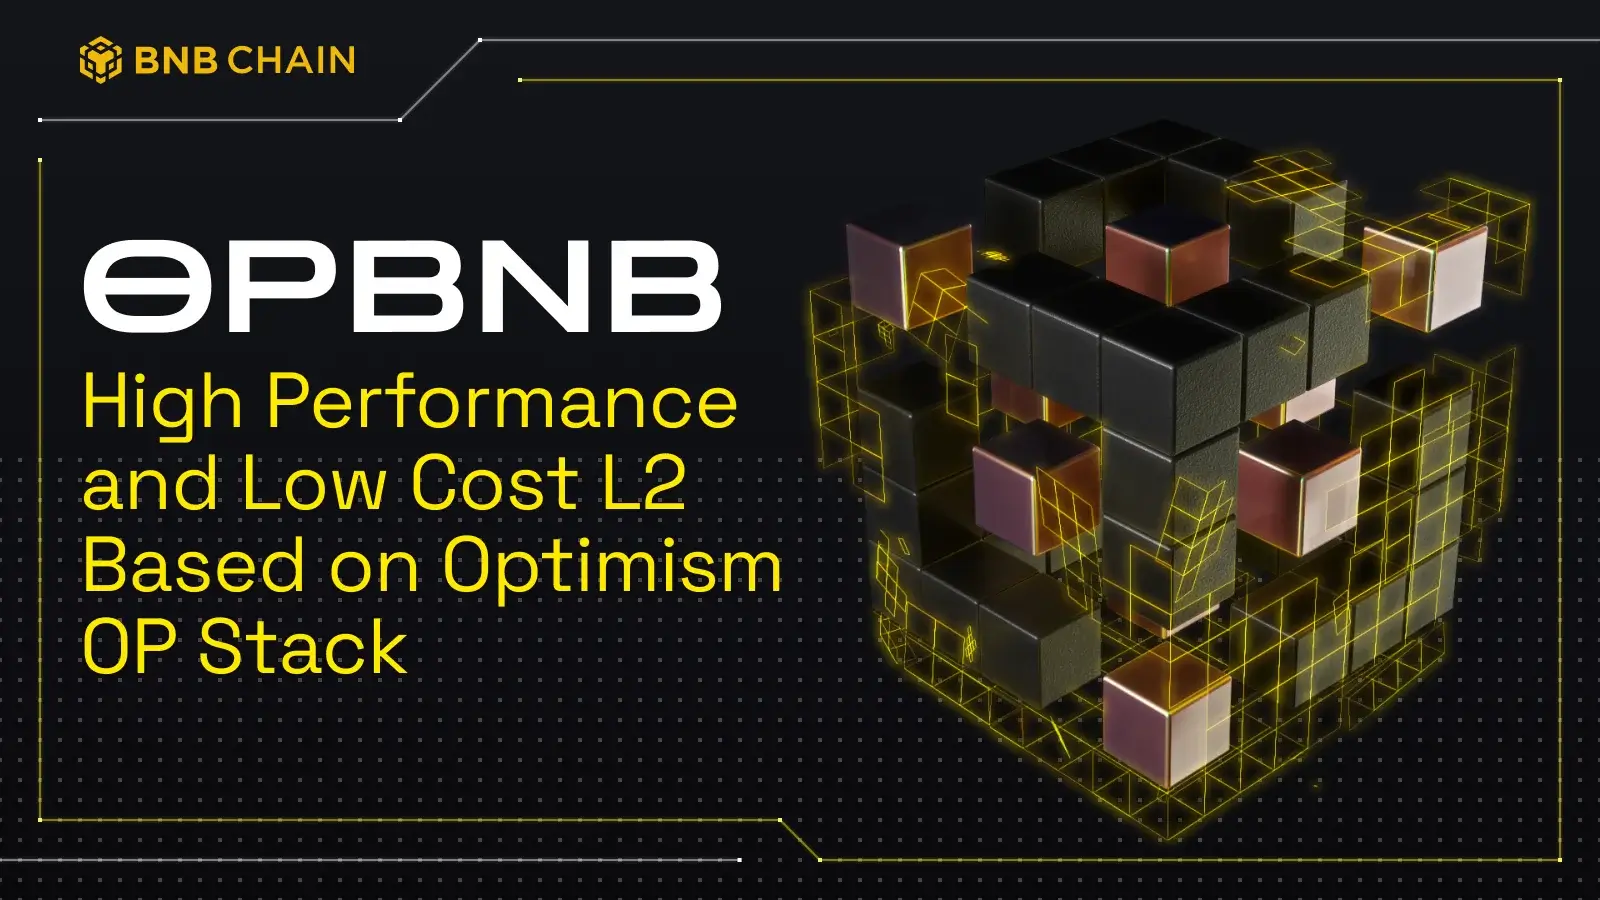 5. BNB Chain Launched L2 Testnet Powered by Optimism